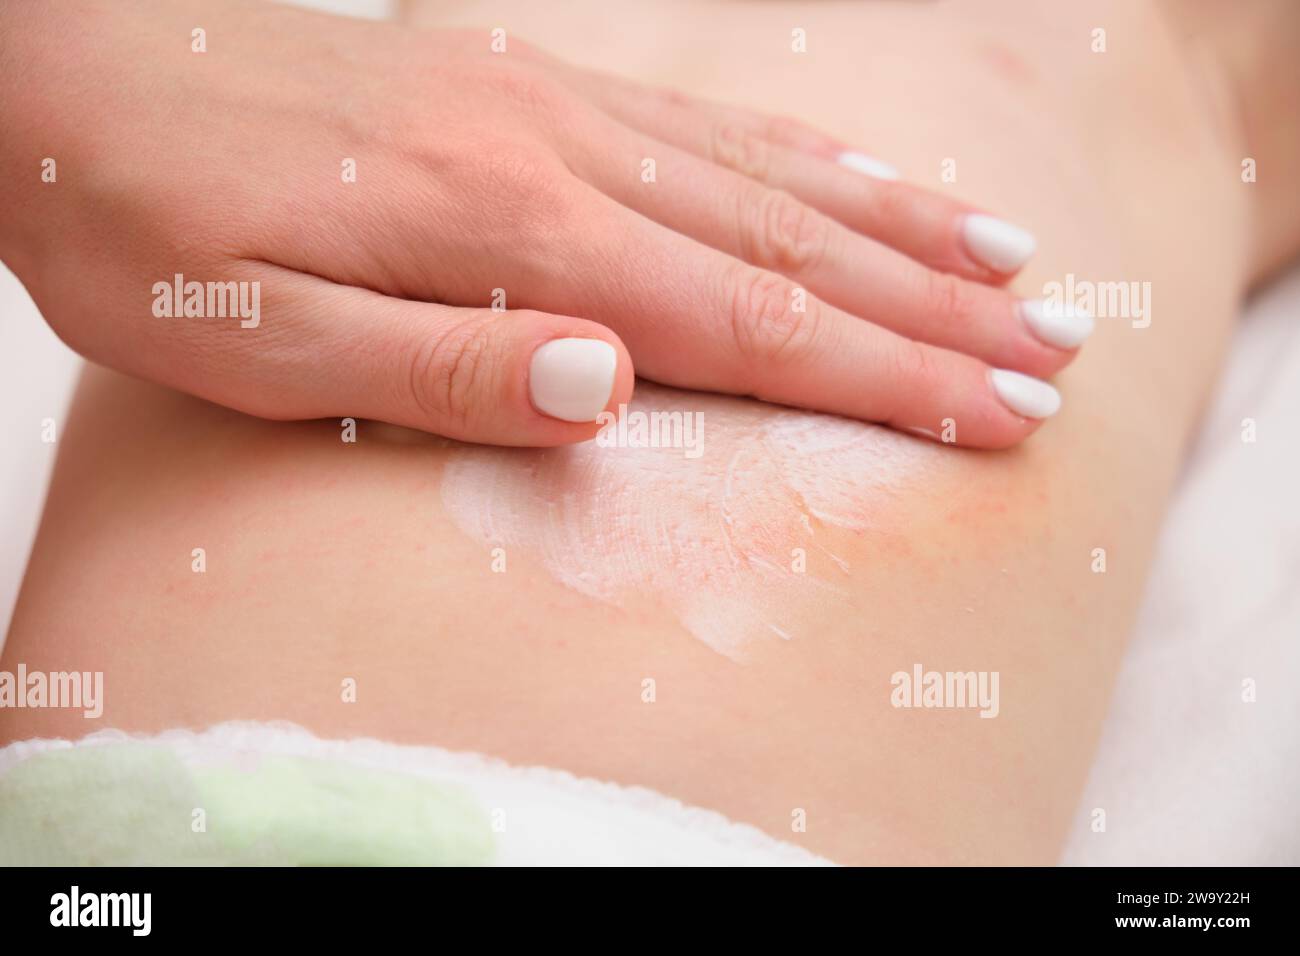 The mother is applying cream to the allergic rash on her child's body. A woman is treating her baby's eczema with a special cream. Stock Photo